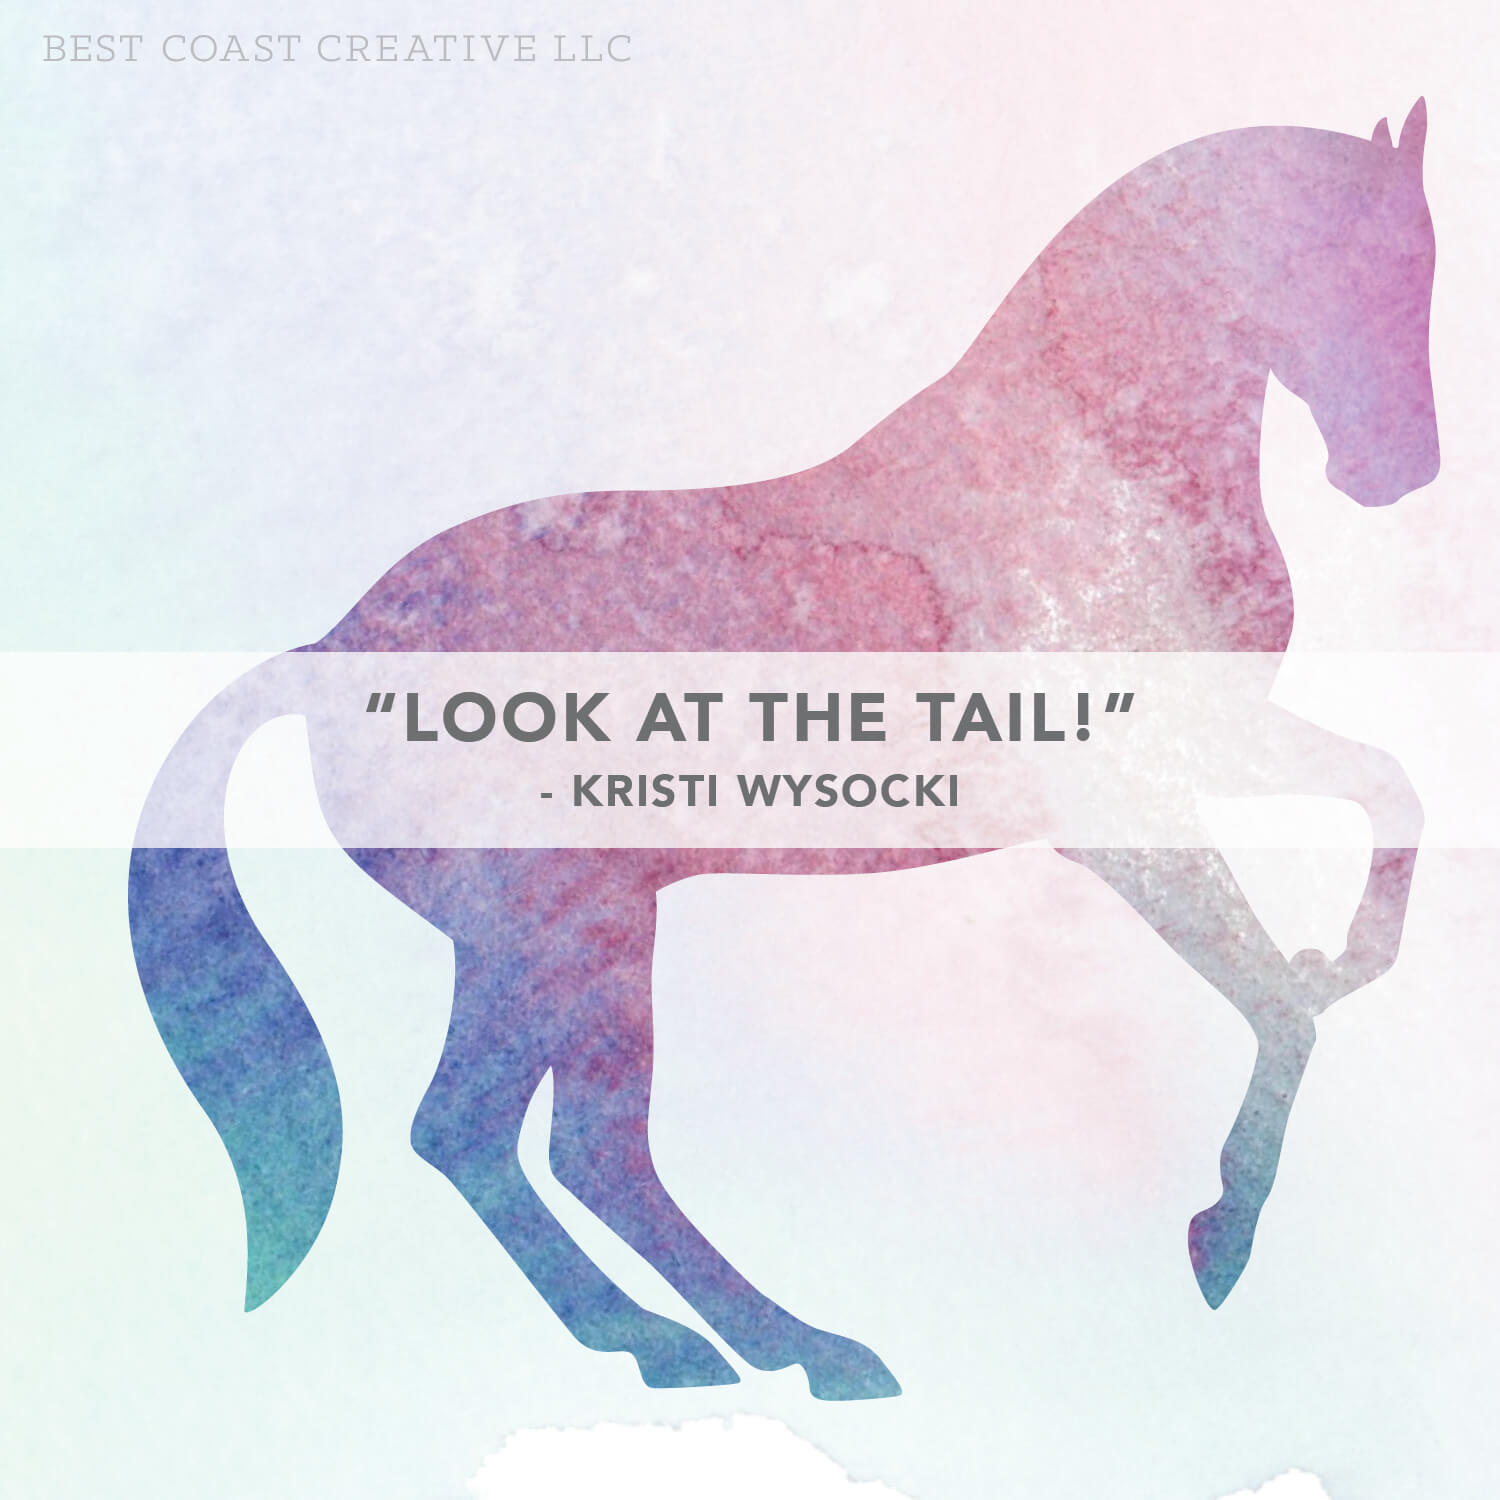 Horse Illustration with Kristi Wysocki clinic quote "Look at the Tail"